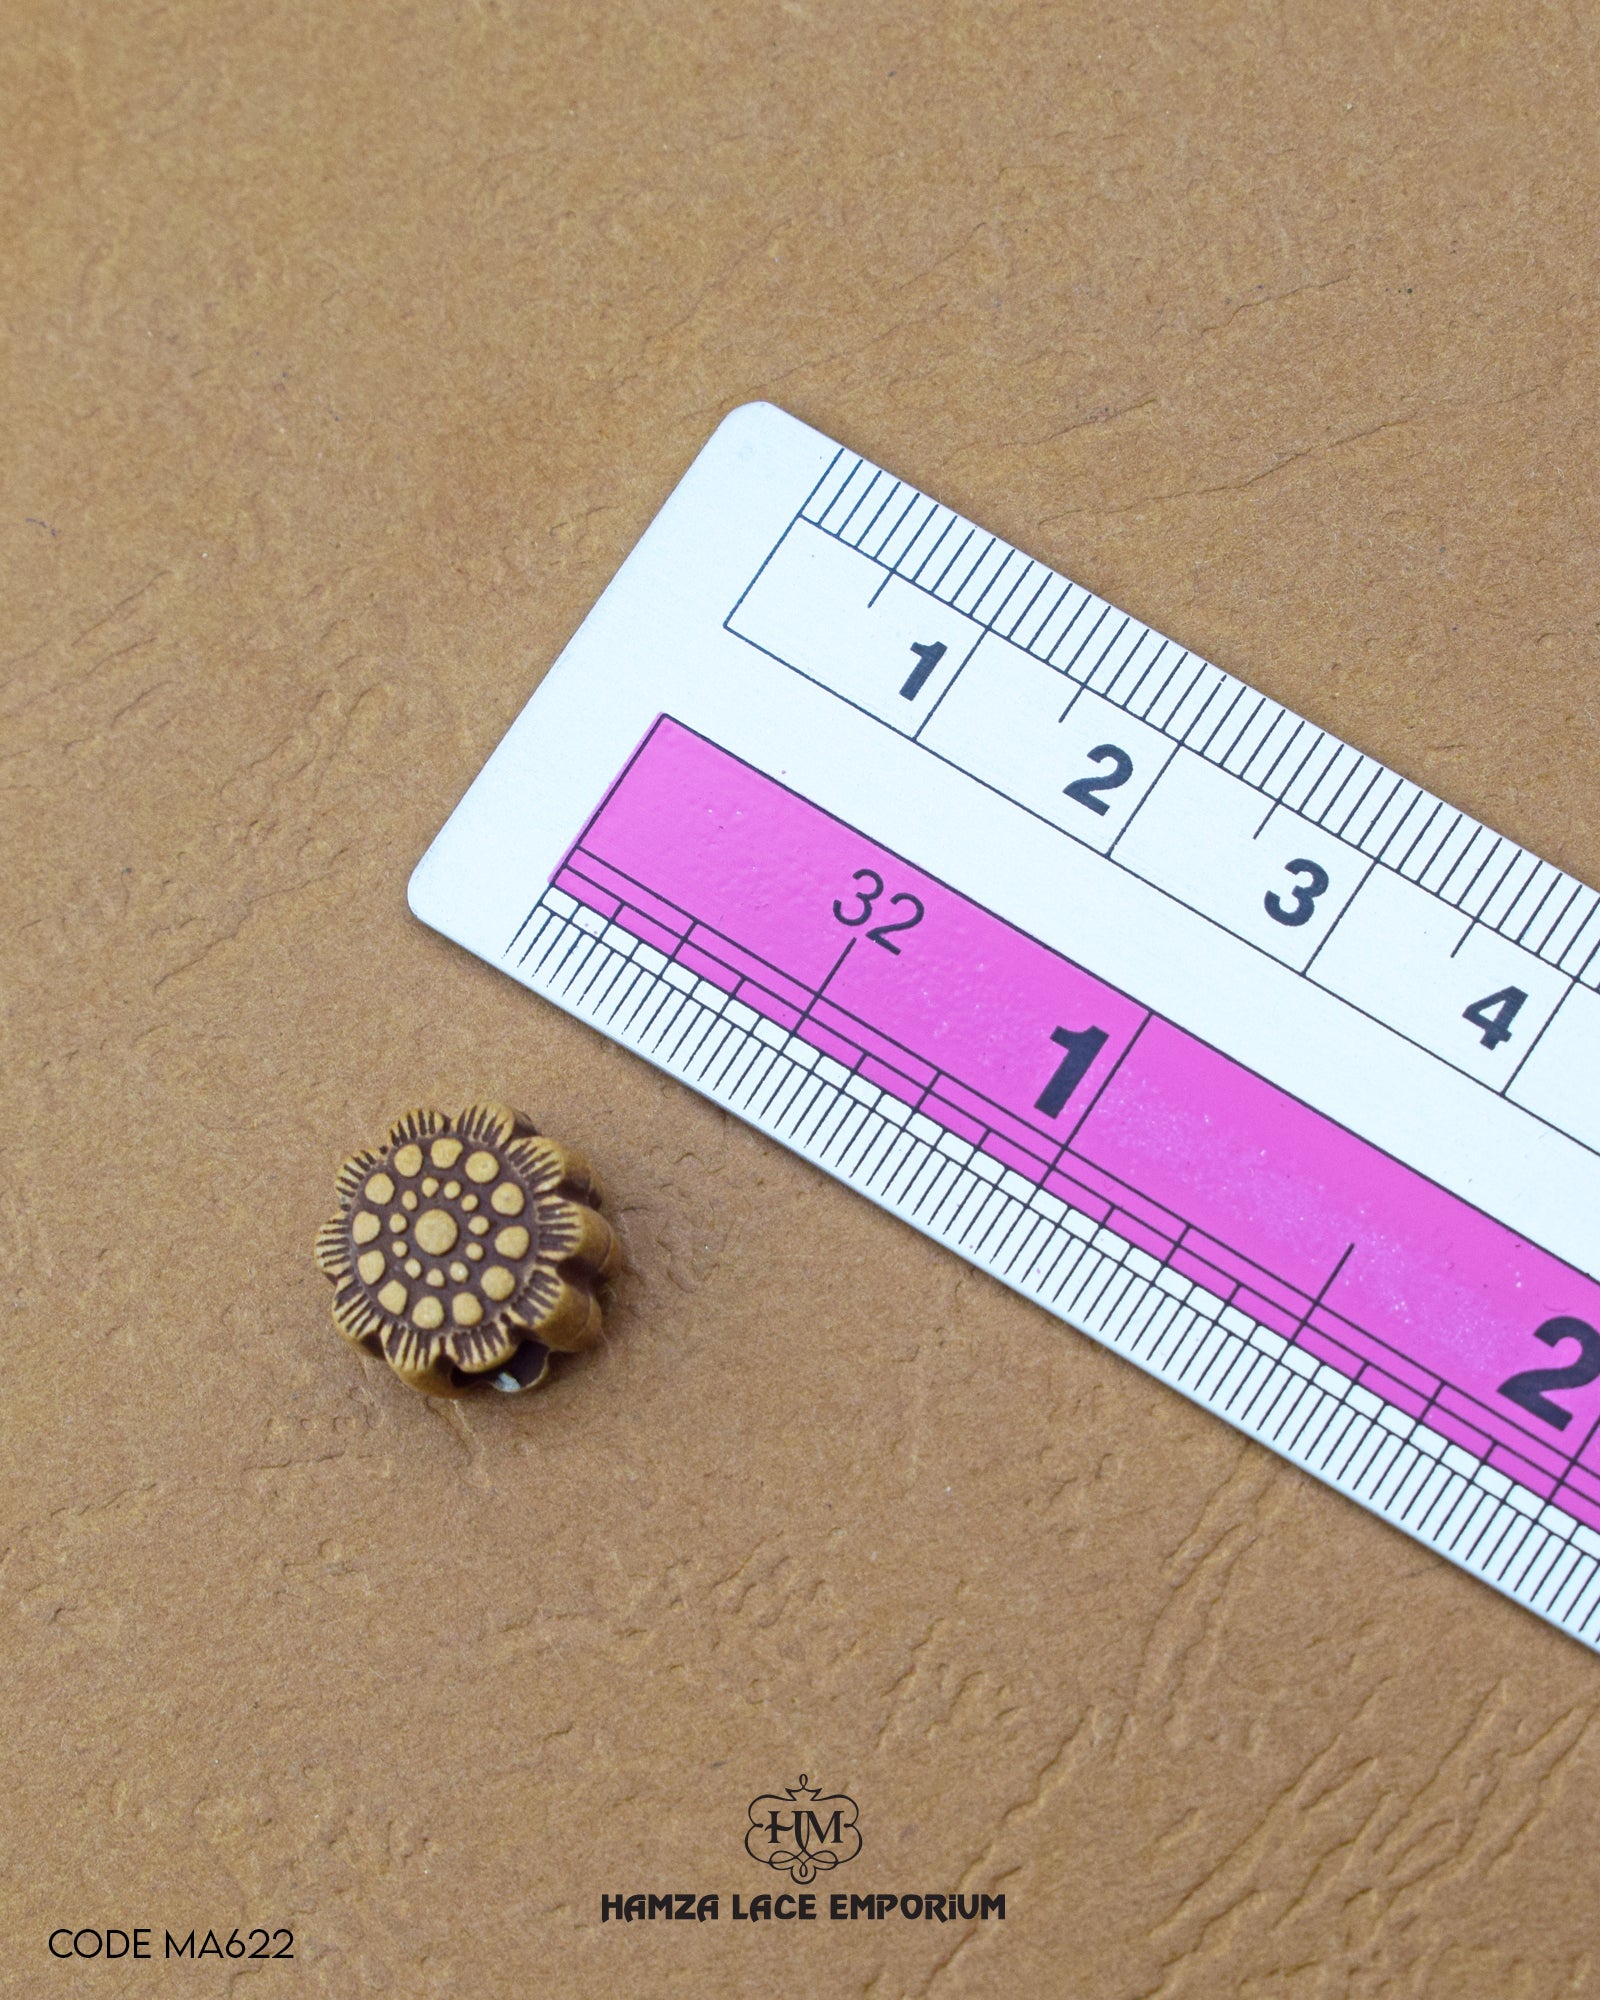 Size of the 'Flower Design Wooden Button MA622' is shown with a ruler